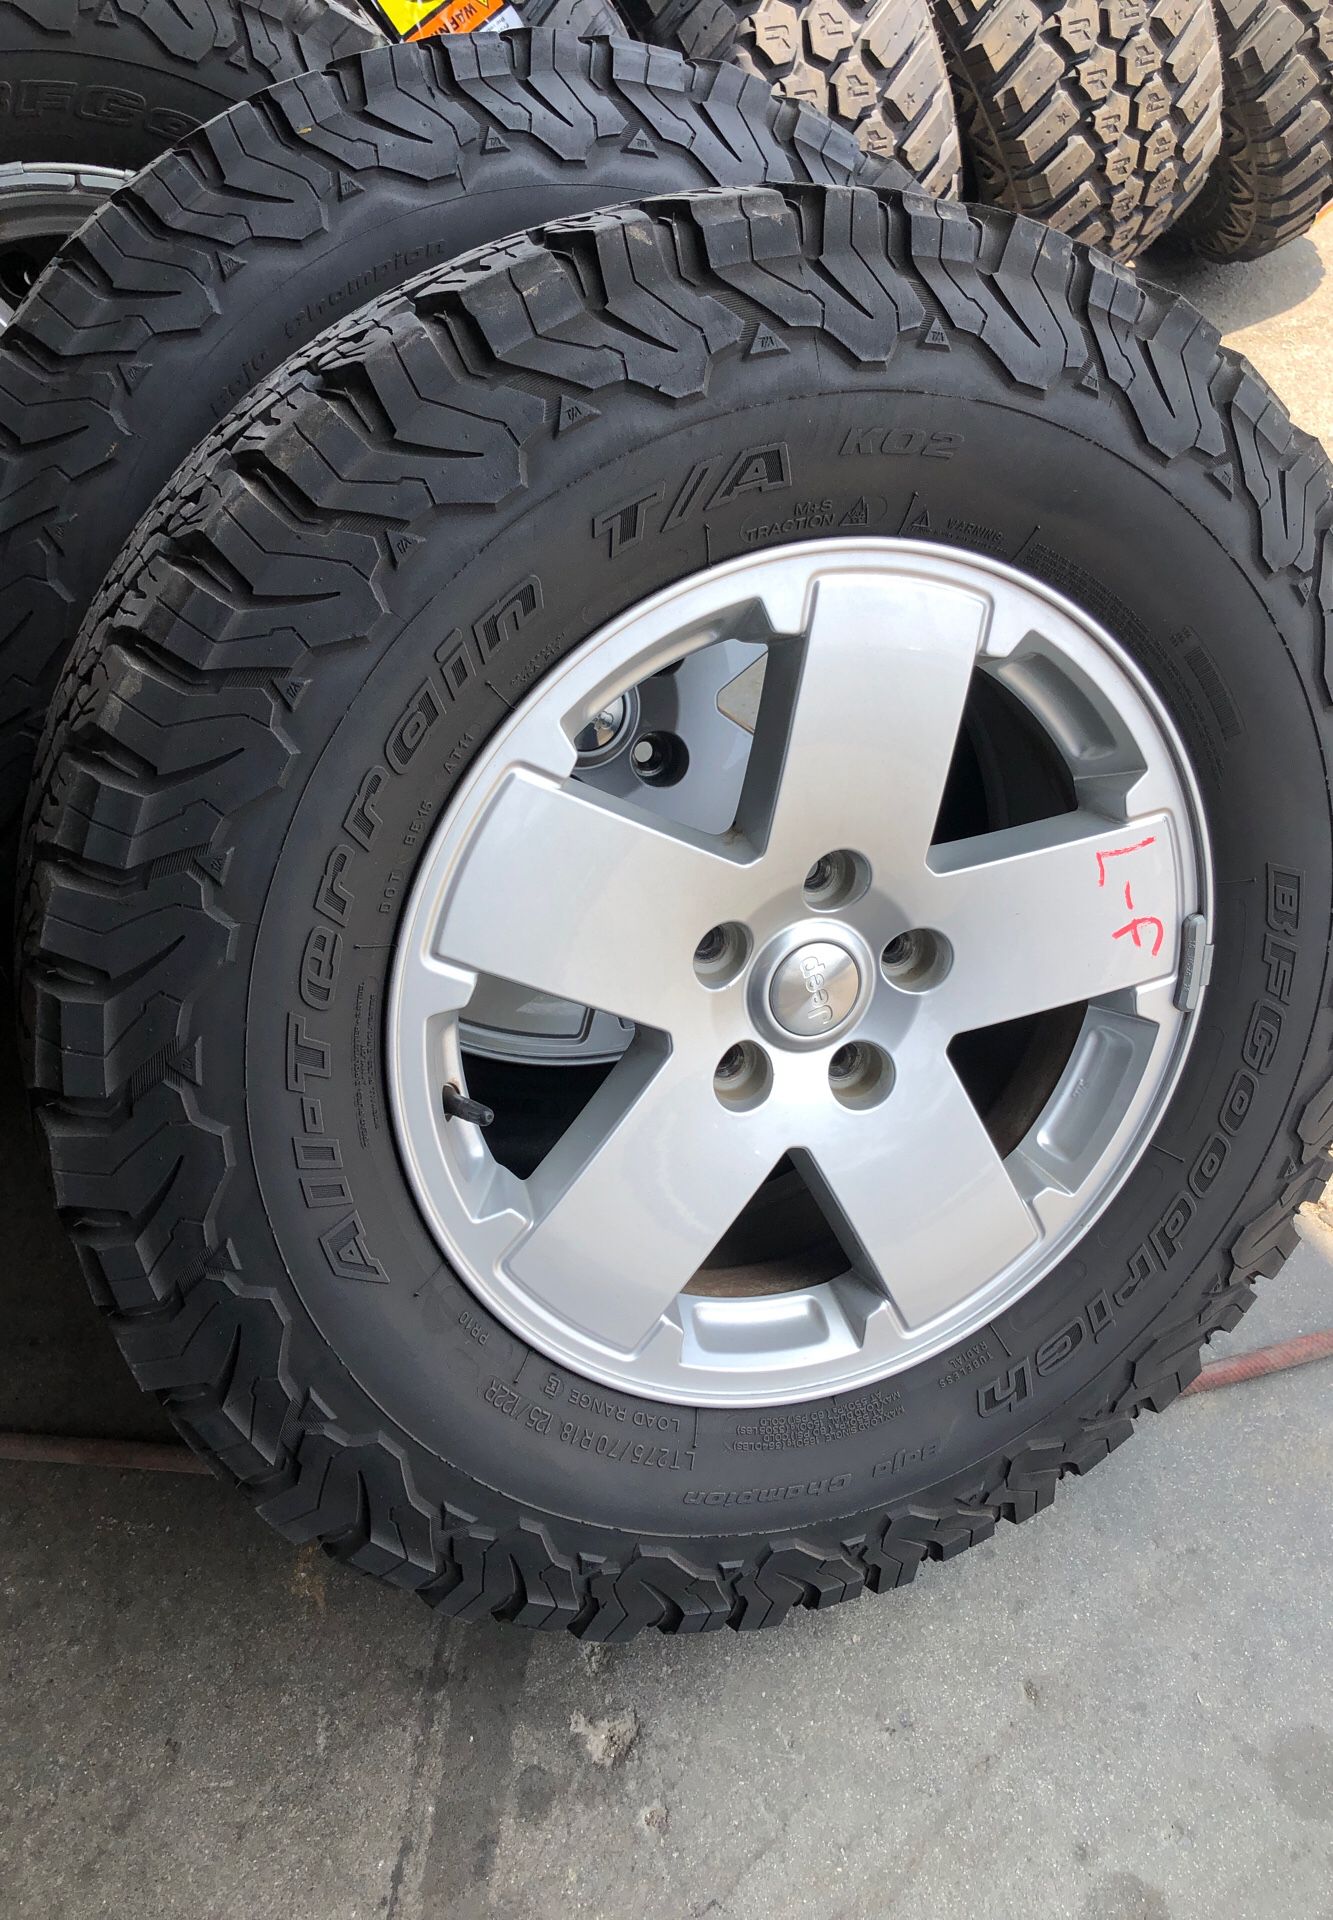 Jeep Wrangler wheels and tires